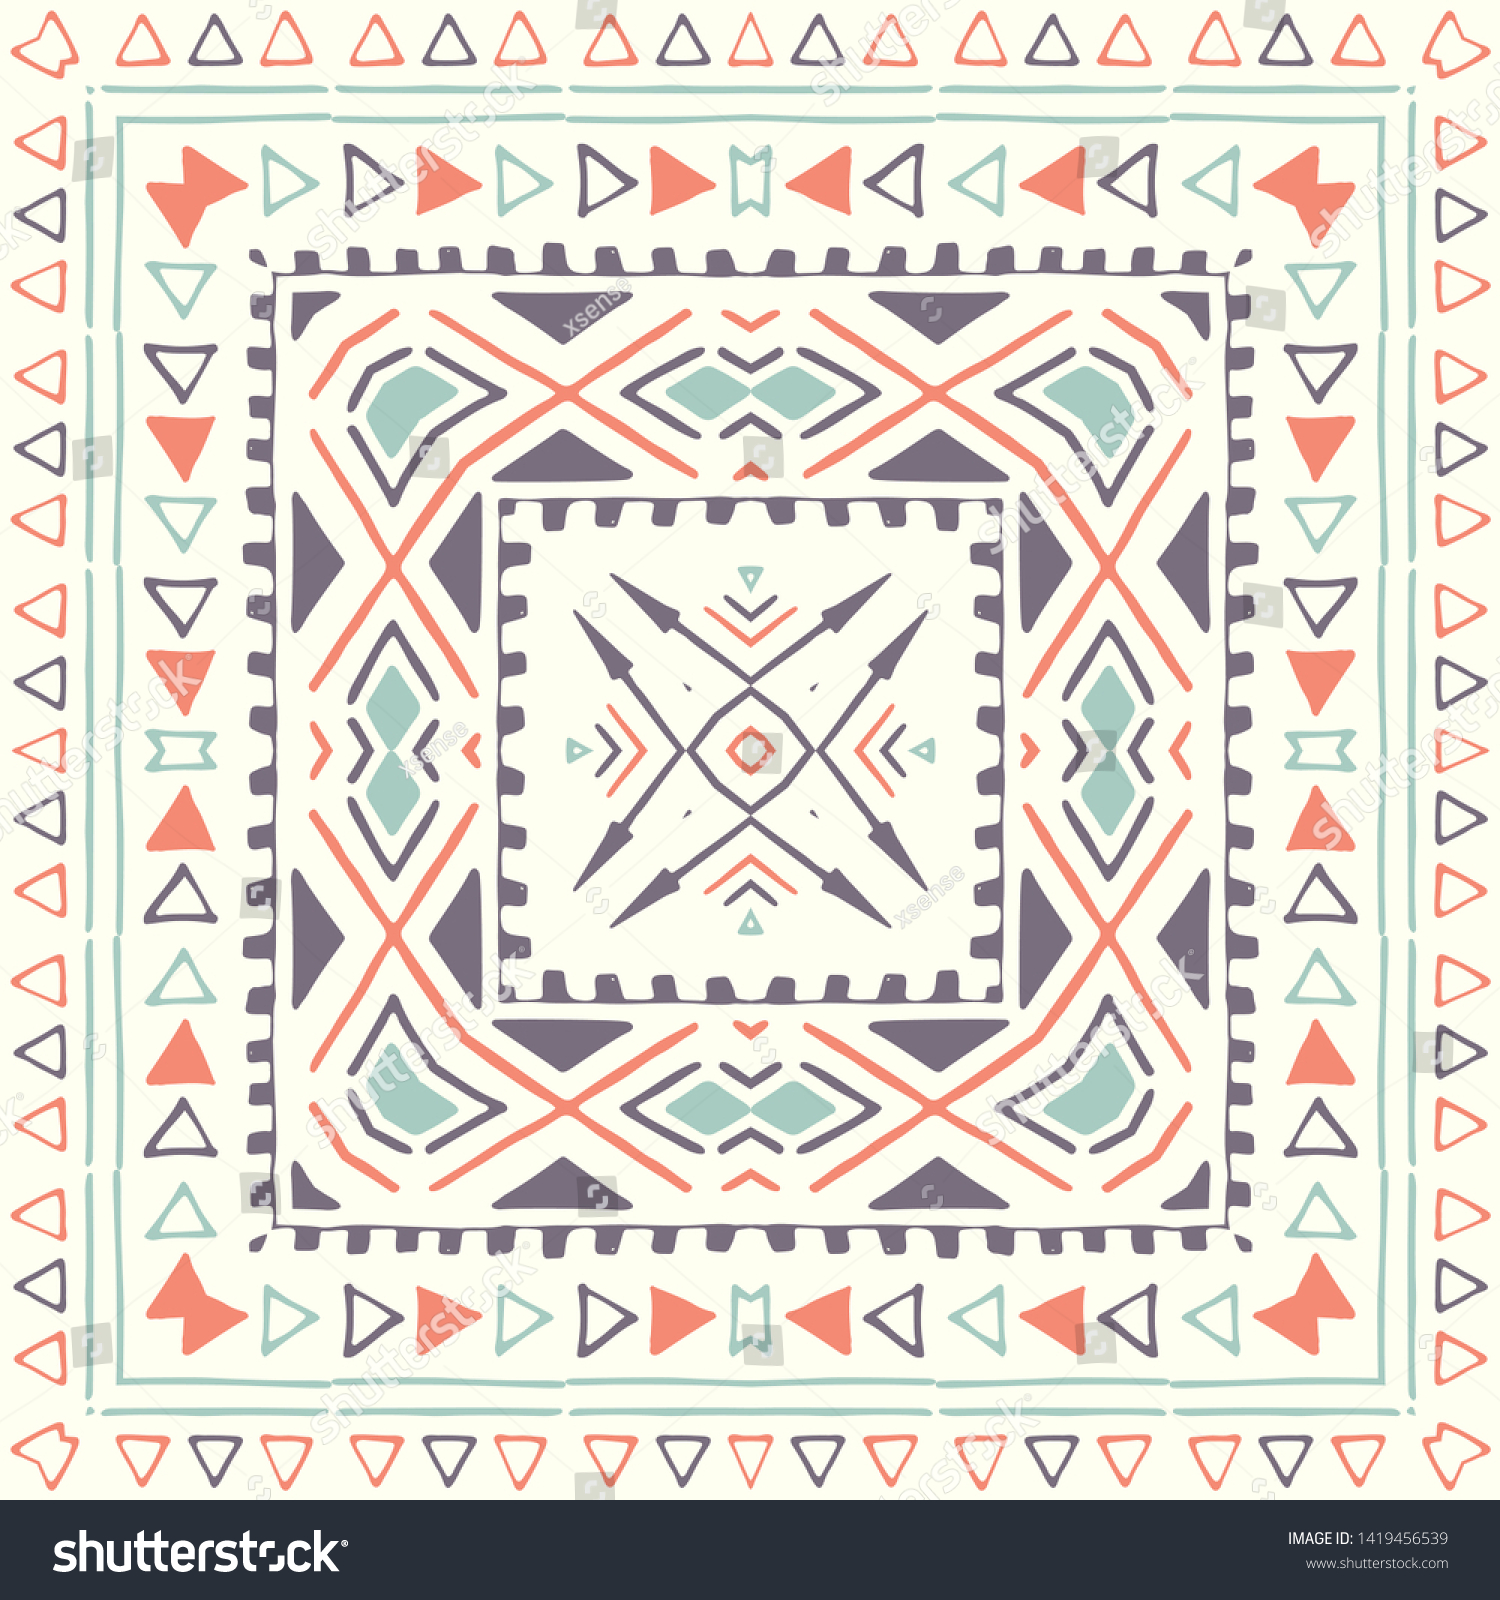 SVG of Traditional Romanian folk art knitted embroidery pattern.  svg